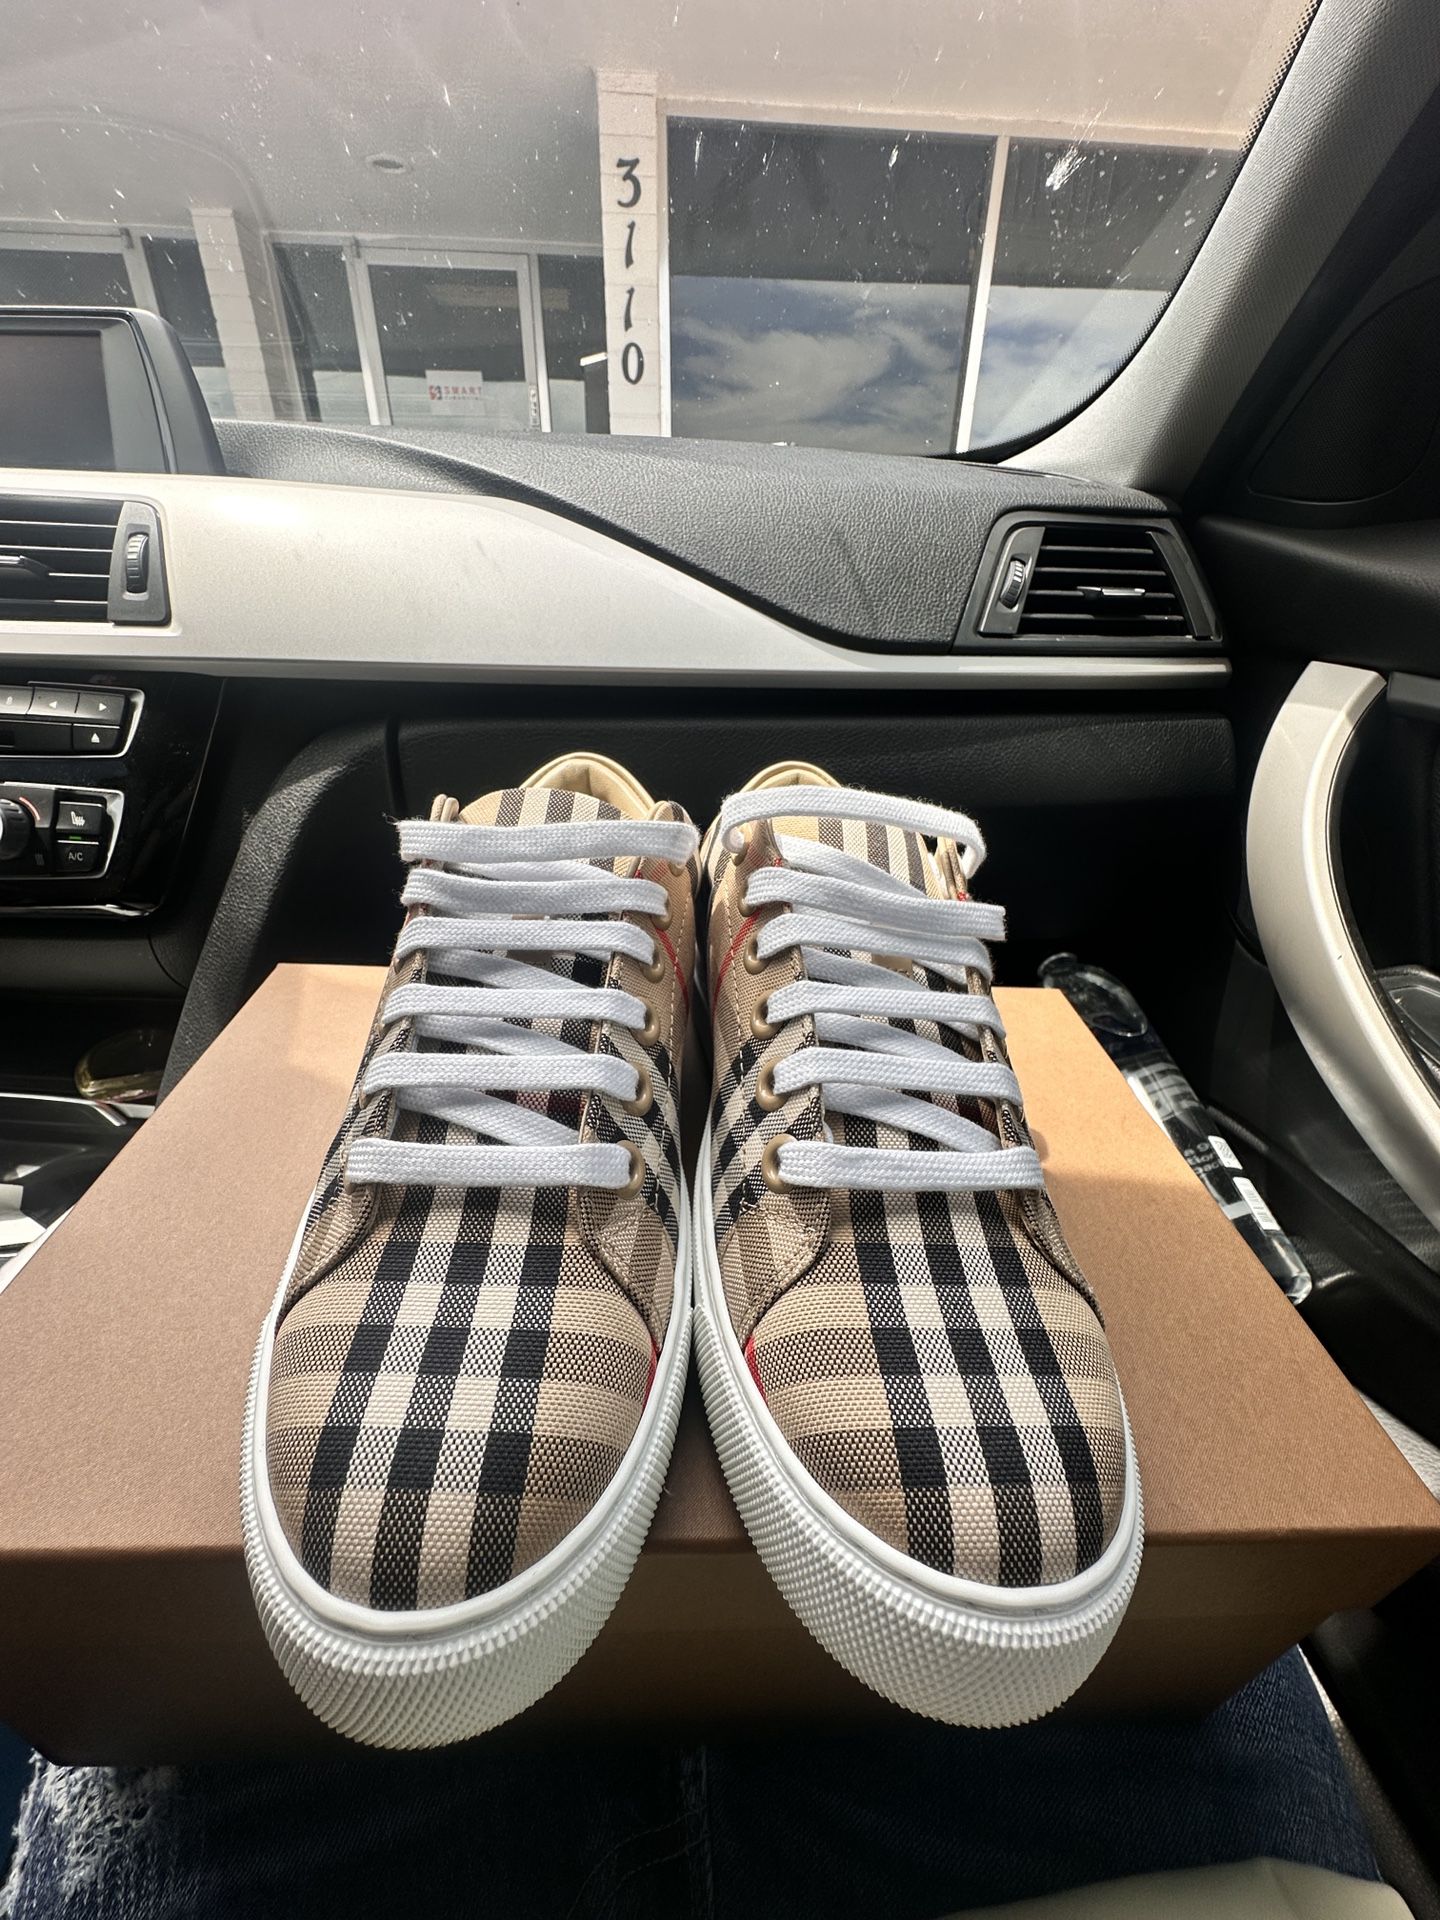 Burberry Woman’s Shoes 